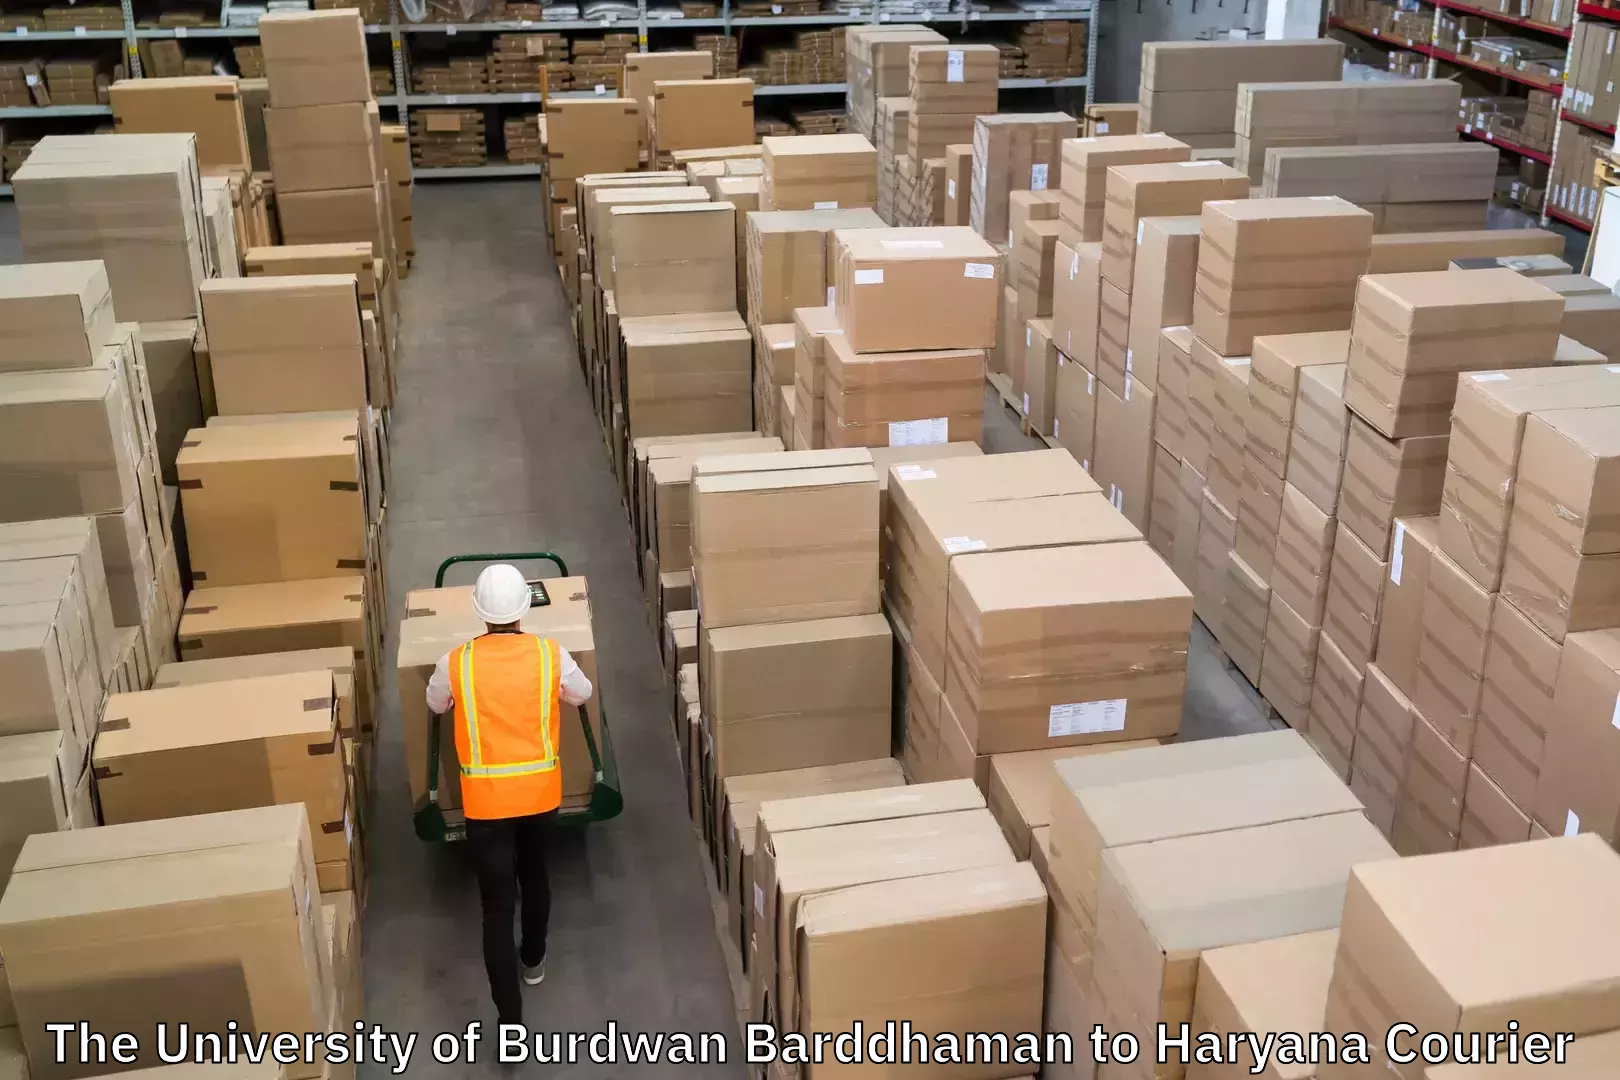 Multi-national courier services The University of Burdwan Barddhaman to Haryana